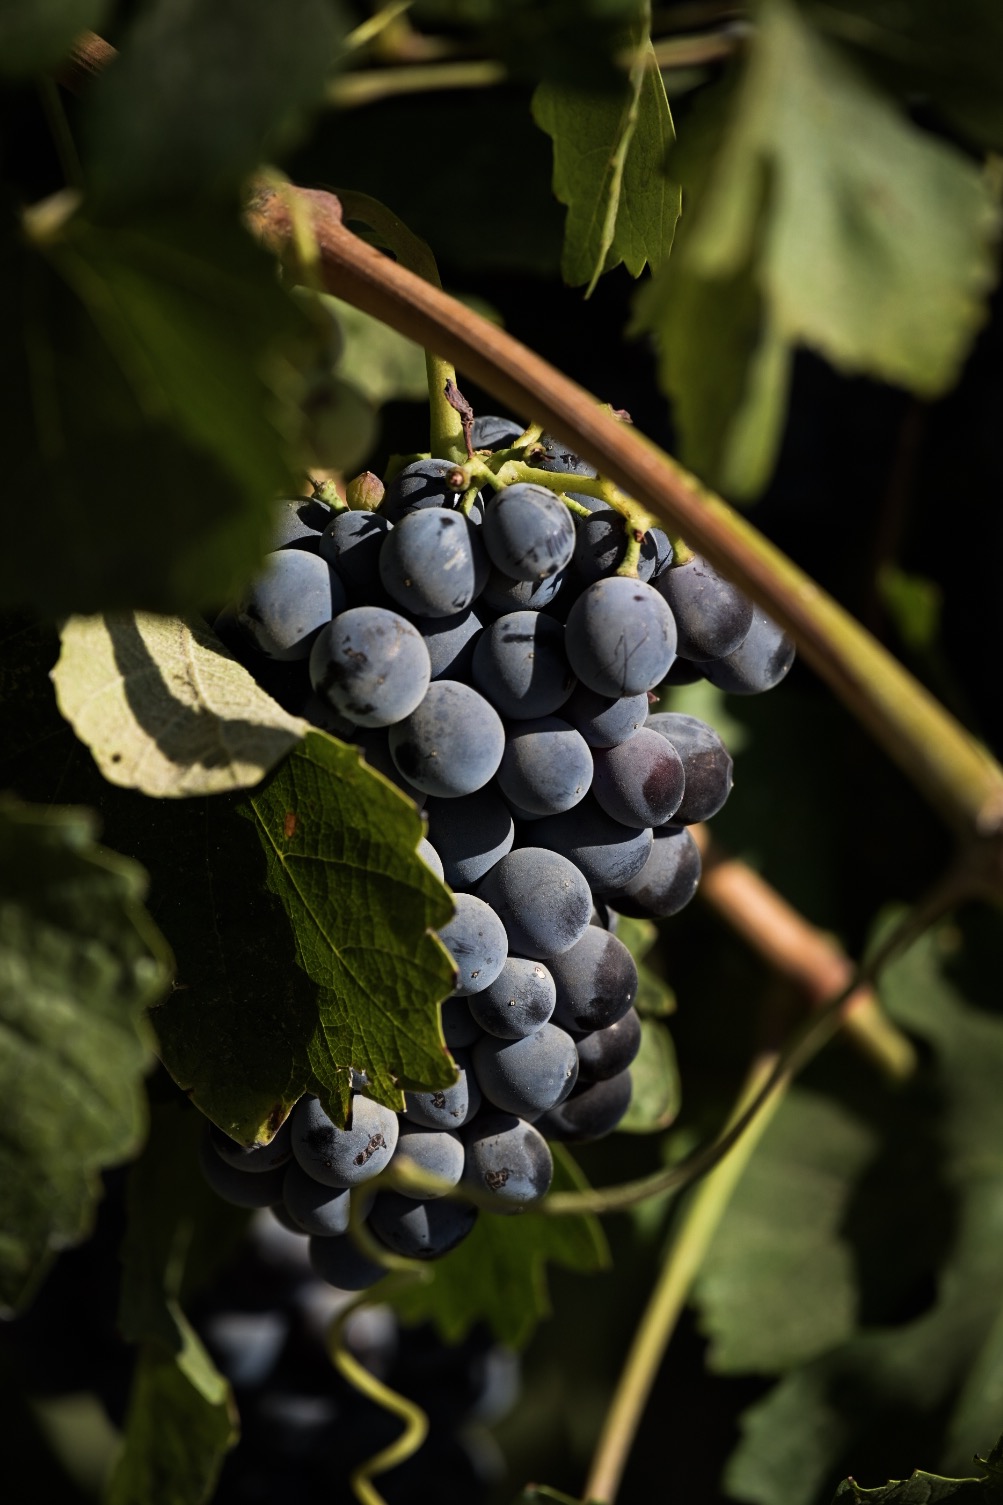 Wine grapes on the vine in Madera, California